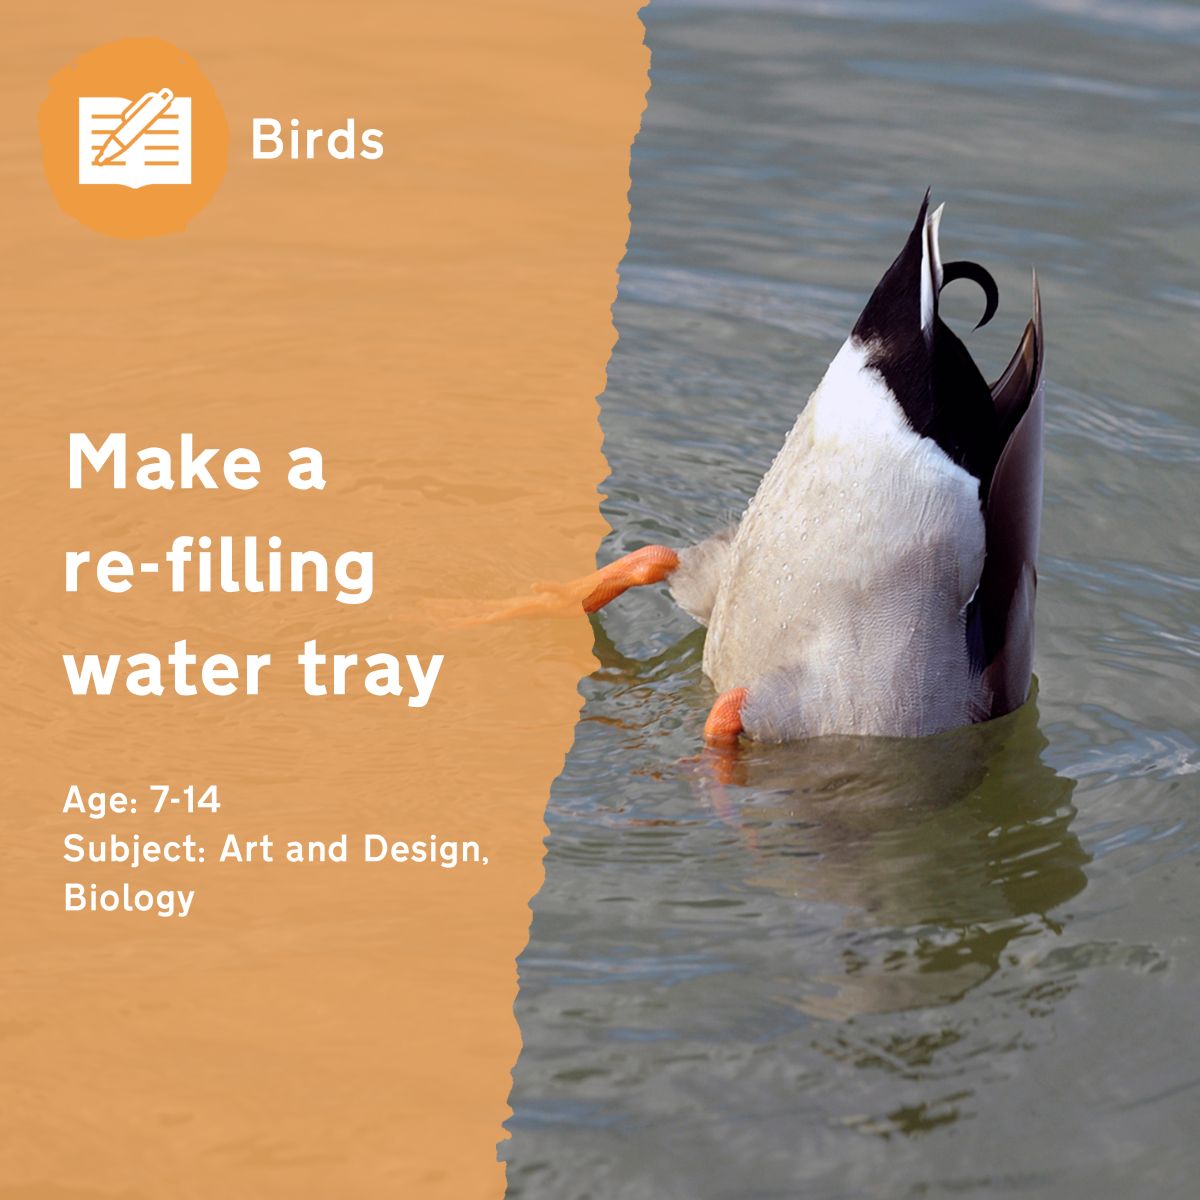 Help pupils make a re-filling water tray for the thirsty birds in your school grounds.This outdoor lesson idea is in PDF format. When you click the 'download' button, the PDF file will be immediately downloaded to your designated folder — usually the 'Downloads' folder.